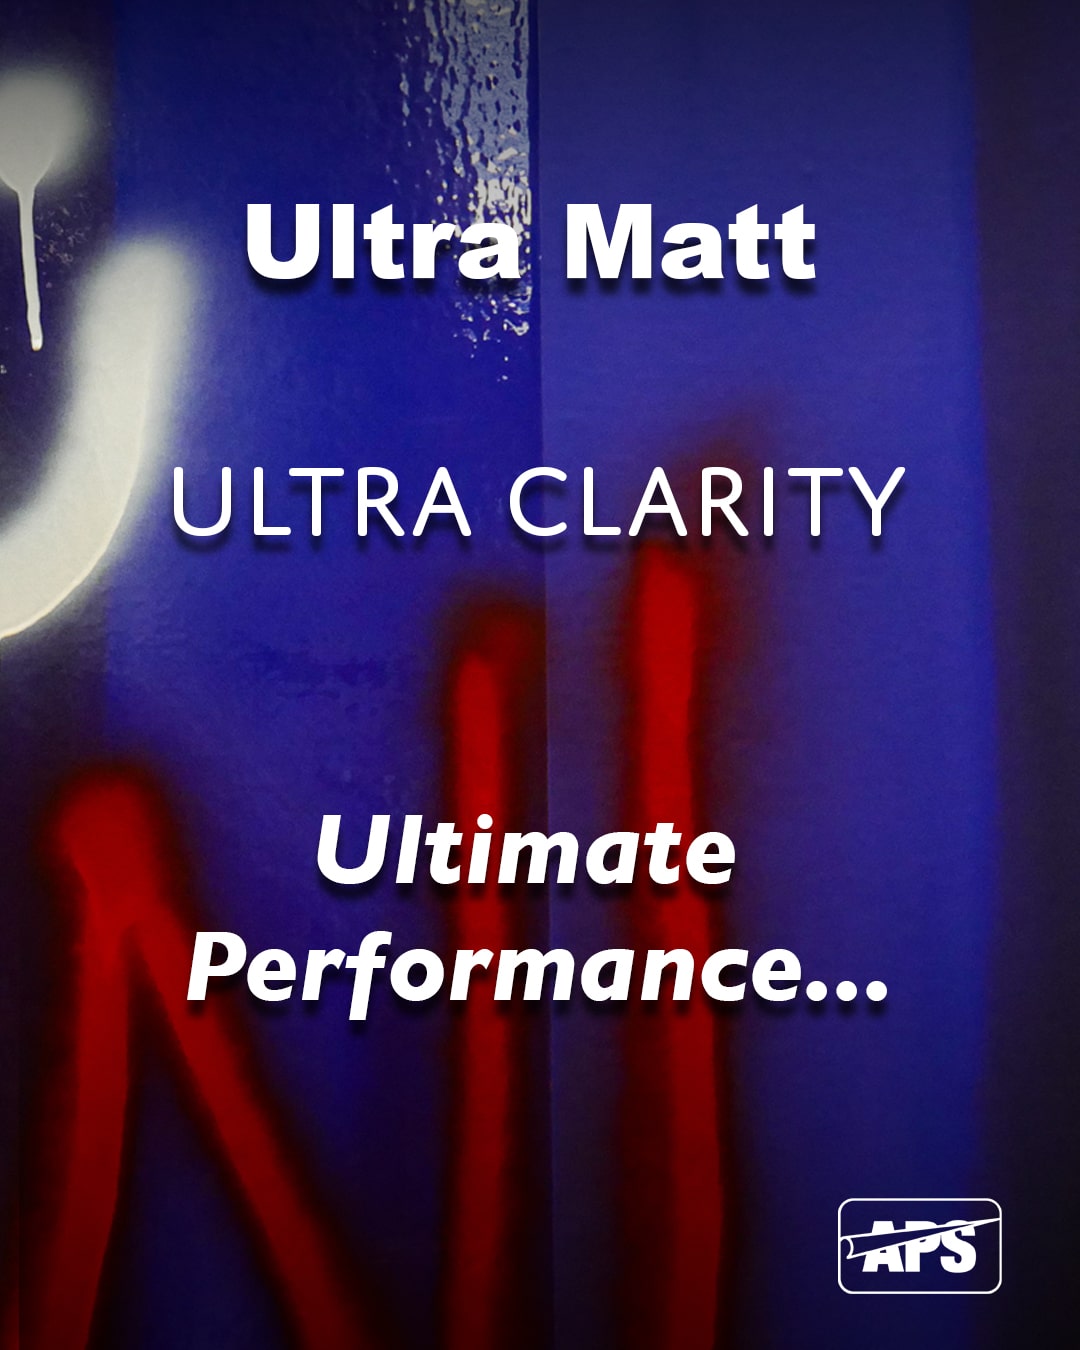 Background blue & black printed image overlaminated with T25-P Ultra Matt anti-graffiti laminate. Graffiti has been sprayed onto the graphic in red and white spray paint and the advertsing text says ultra matt, ultra clarity, ultimate performance. Just clean with anti graffiti cleaning agents to remove the graffiti vandalism!